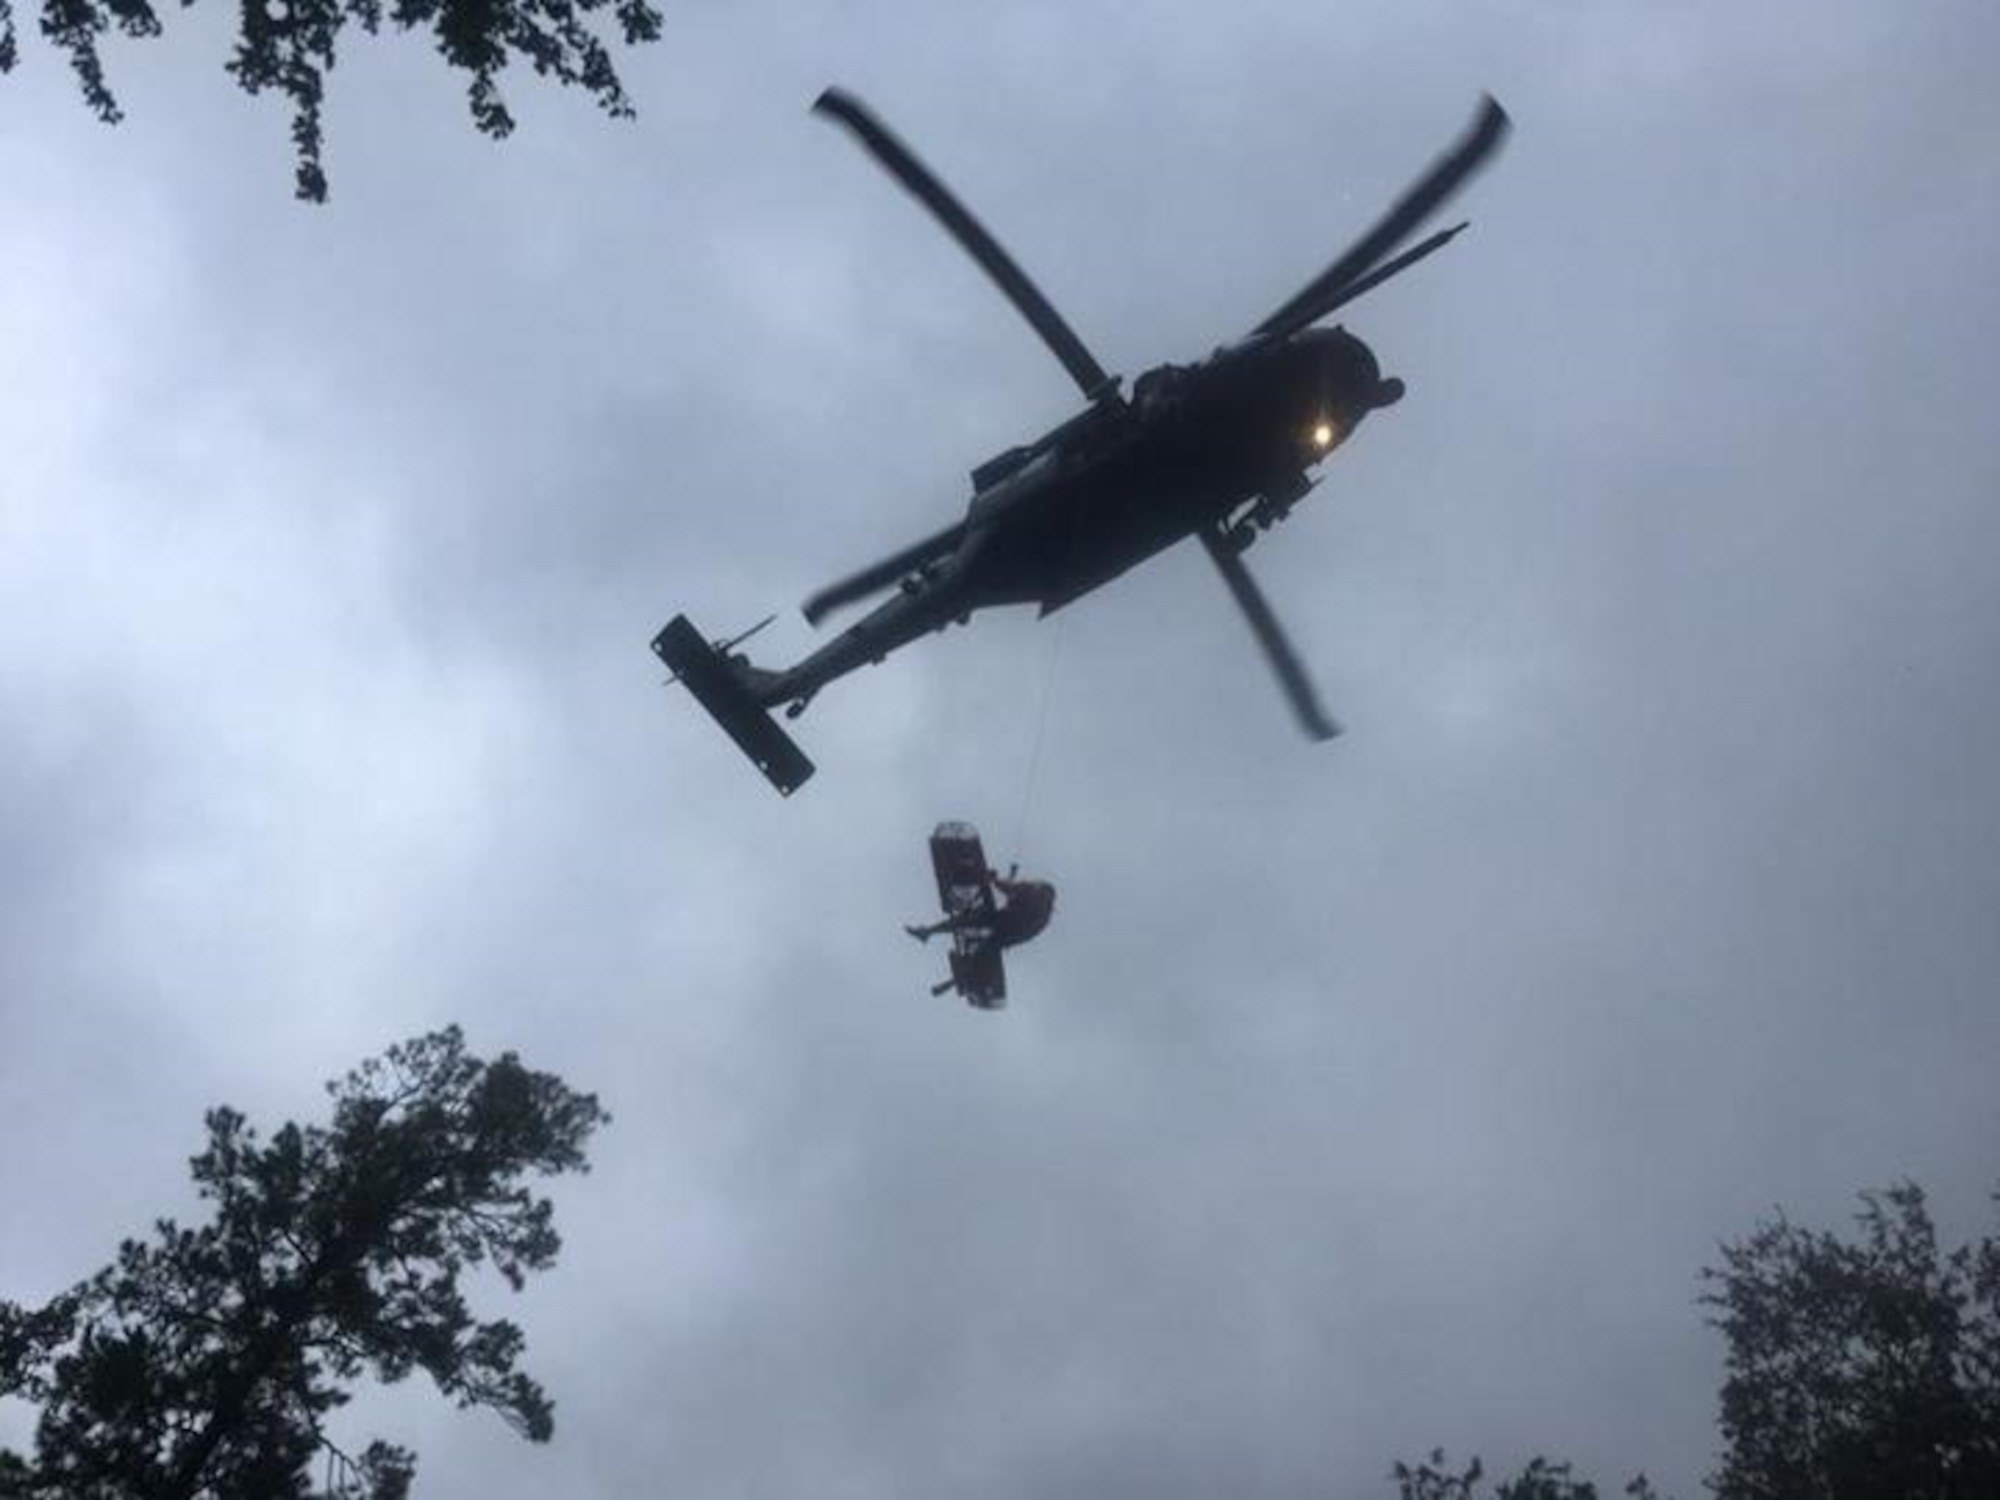 Maj. Jason Tomas, HH-60G Pave Hawk helicopter pilot and his crew rescued five people their first day on the job August 29, 2017 hoisting them up from the flooded Texas grounds below. Approximately 94 Citizen Airmen have joined forces with their northern neighbors at Moody Air Force Base, Georgia, the 23rd Rescue Wing, and are operating out of College Station, Texas to rescue people affected by the aftermath of Hurricane Harvey in support of Air Force’s Northern search and rescue mission for FEMA disaster relief efforts. (U.S. Air Force photo)